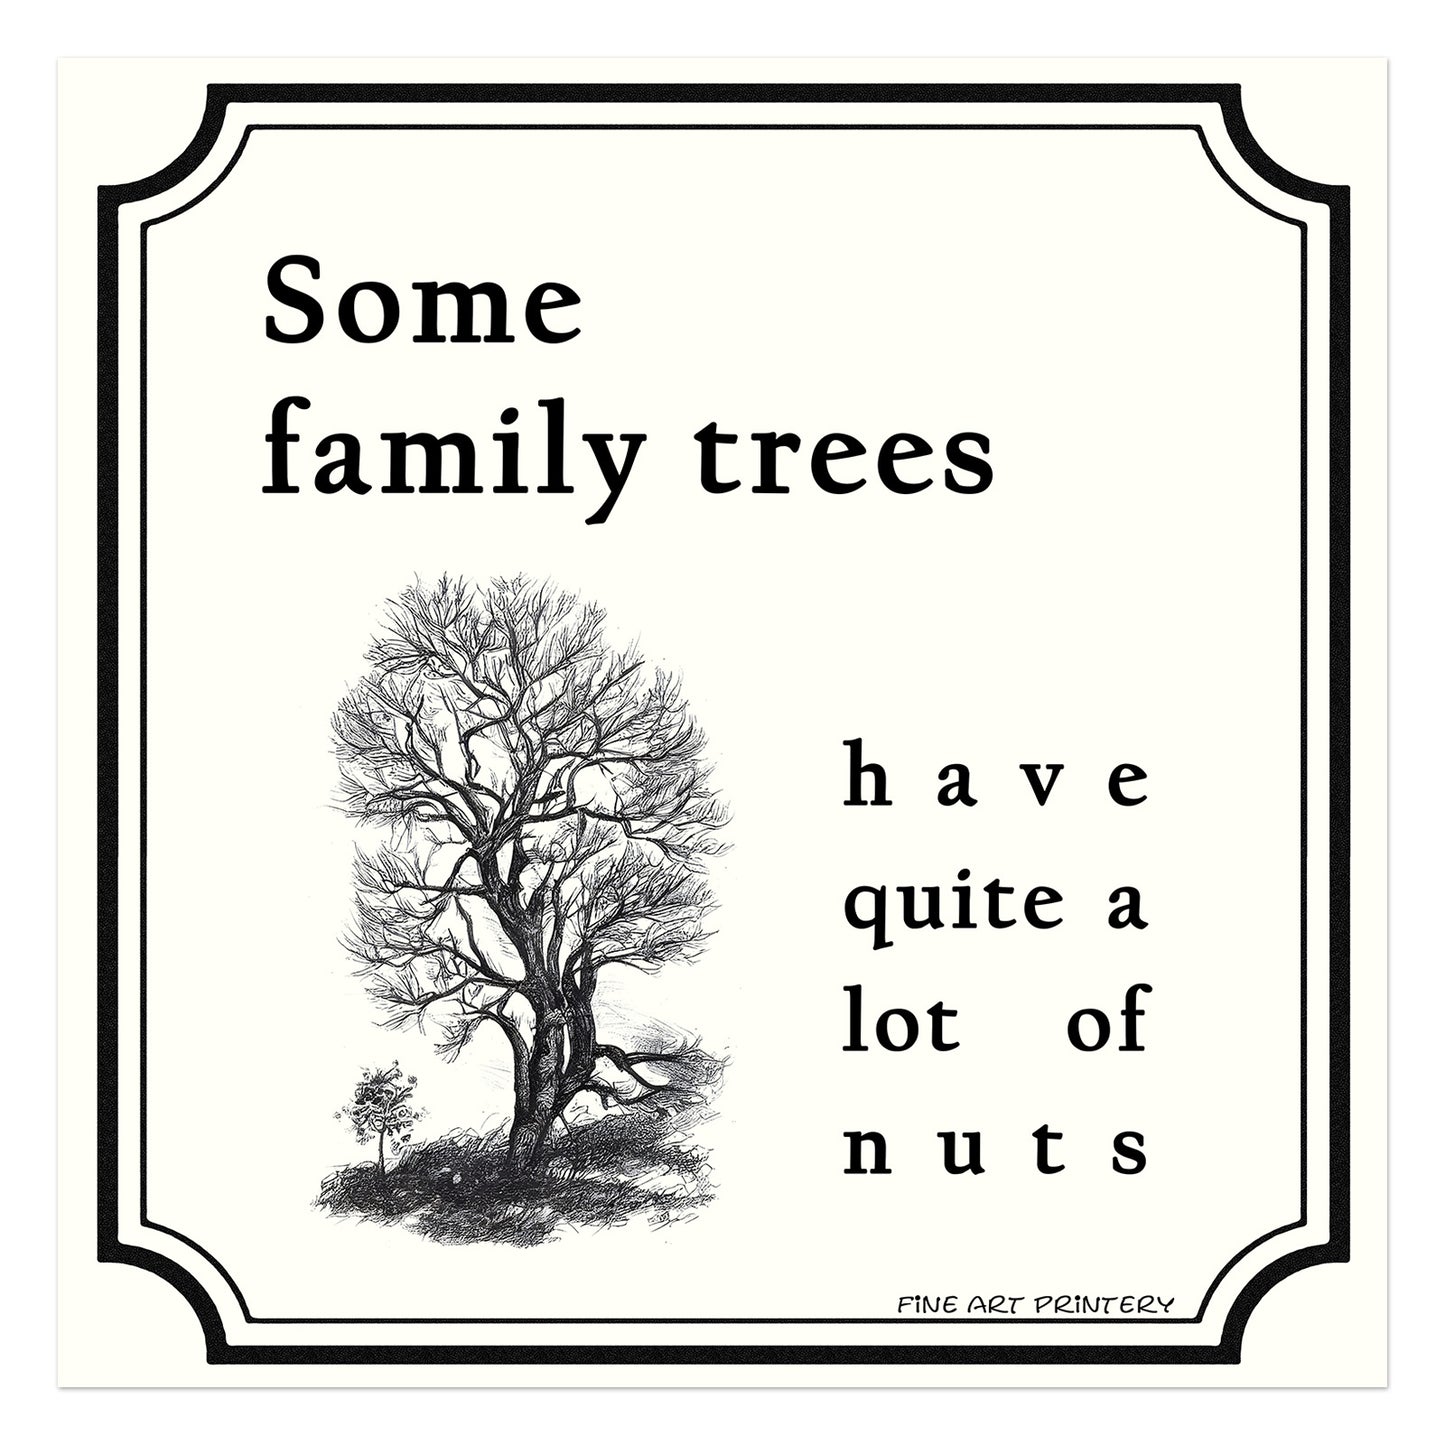 Some family trees have quite a lot of nuts